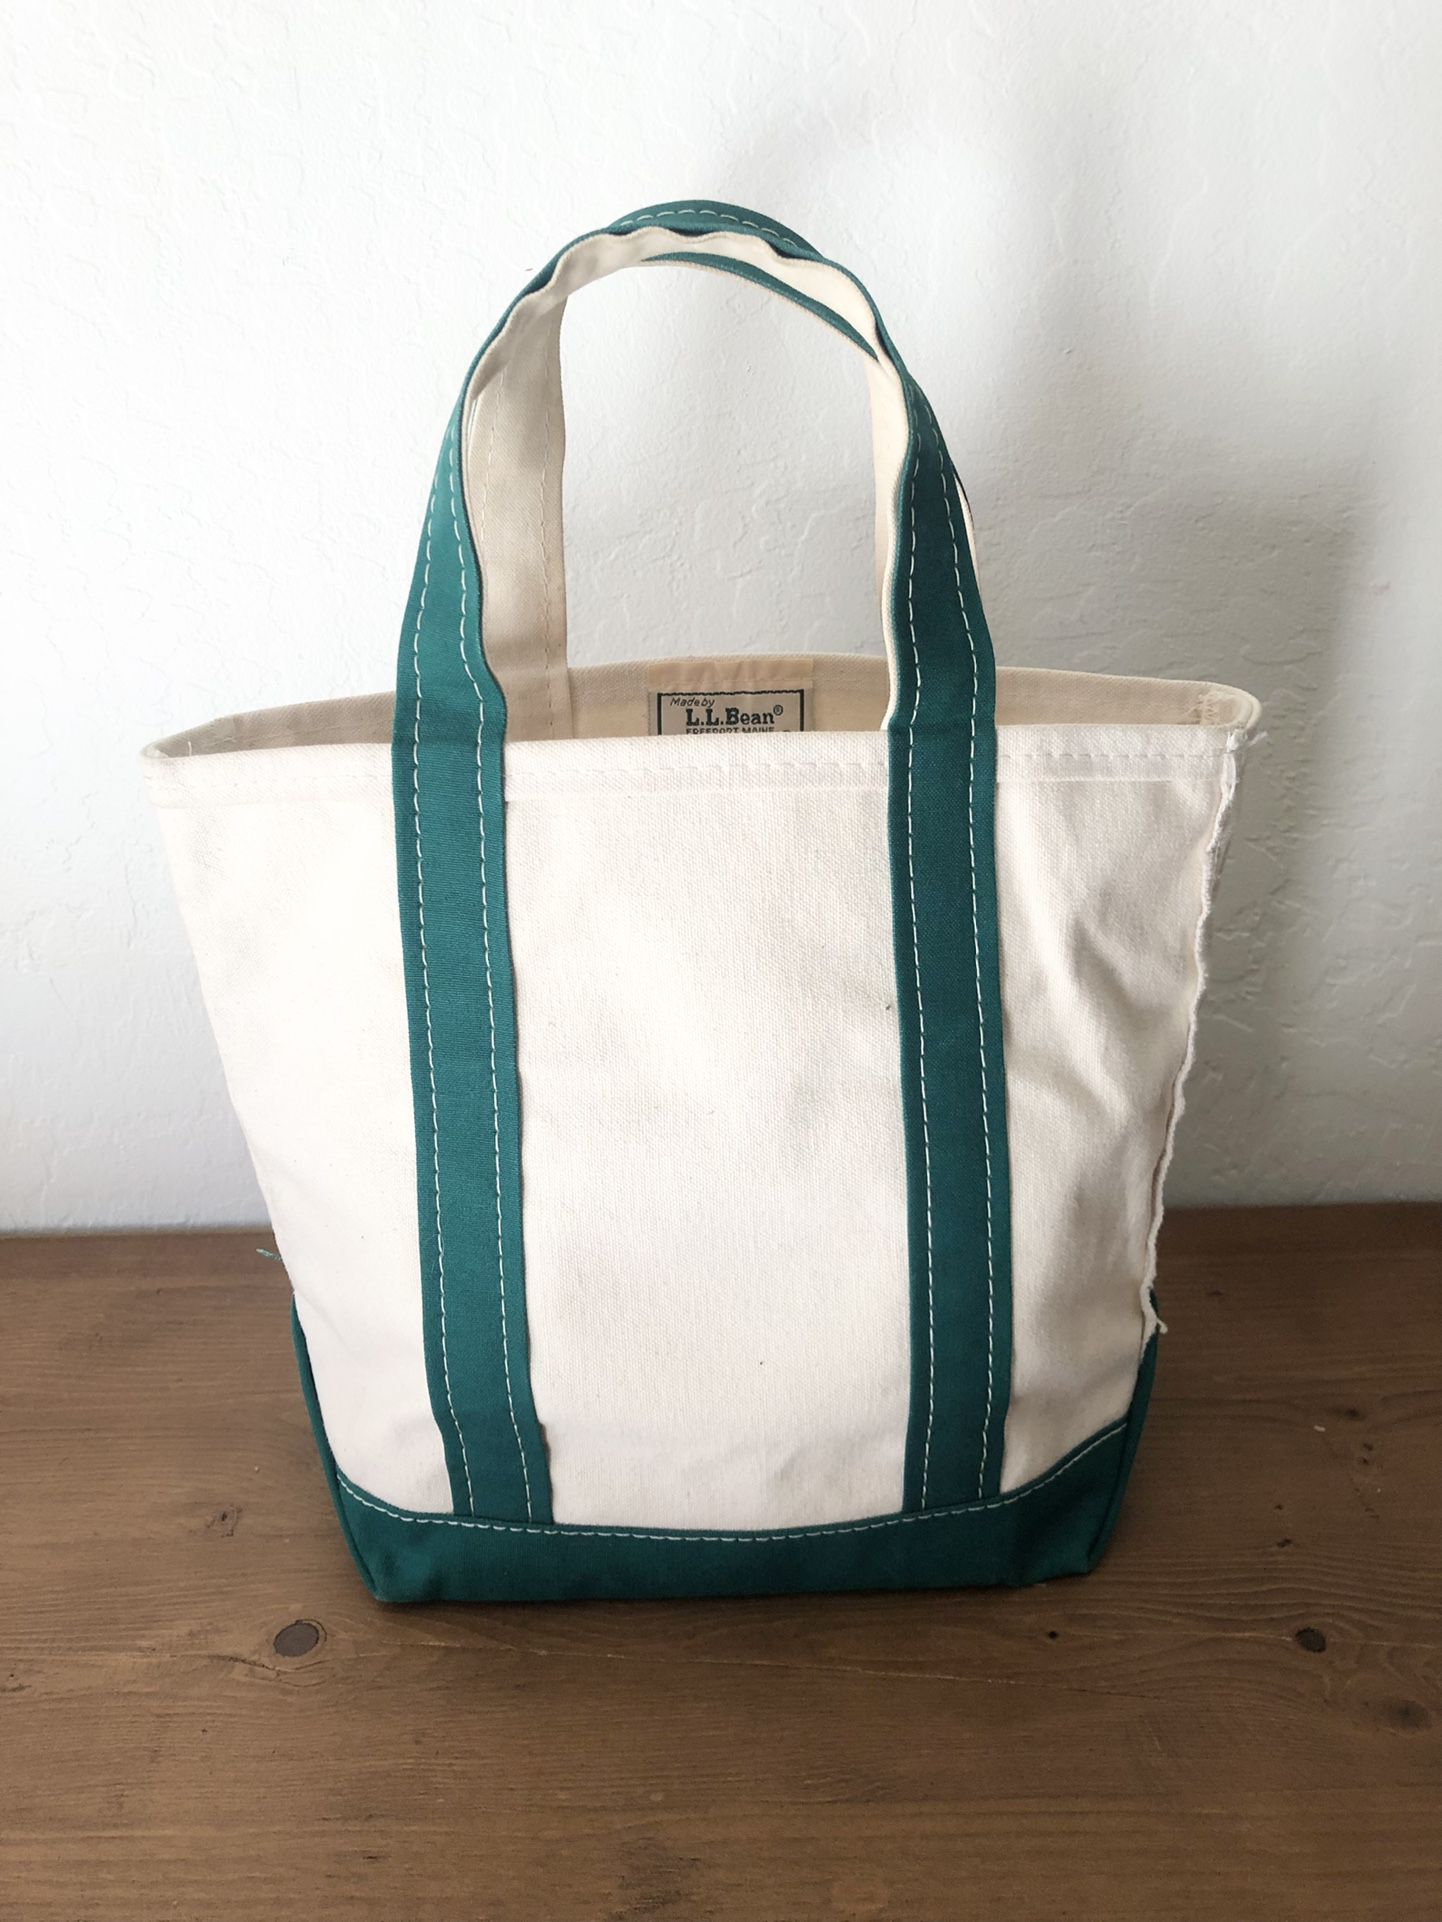 Vintage LL Bean Boat And Tote Small Canvas Bag Green White RARE SIZE & CONDITION.